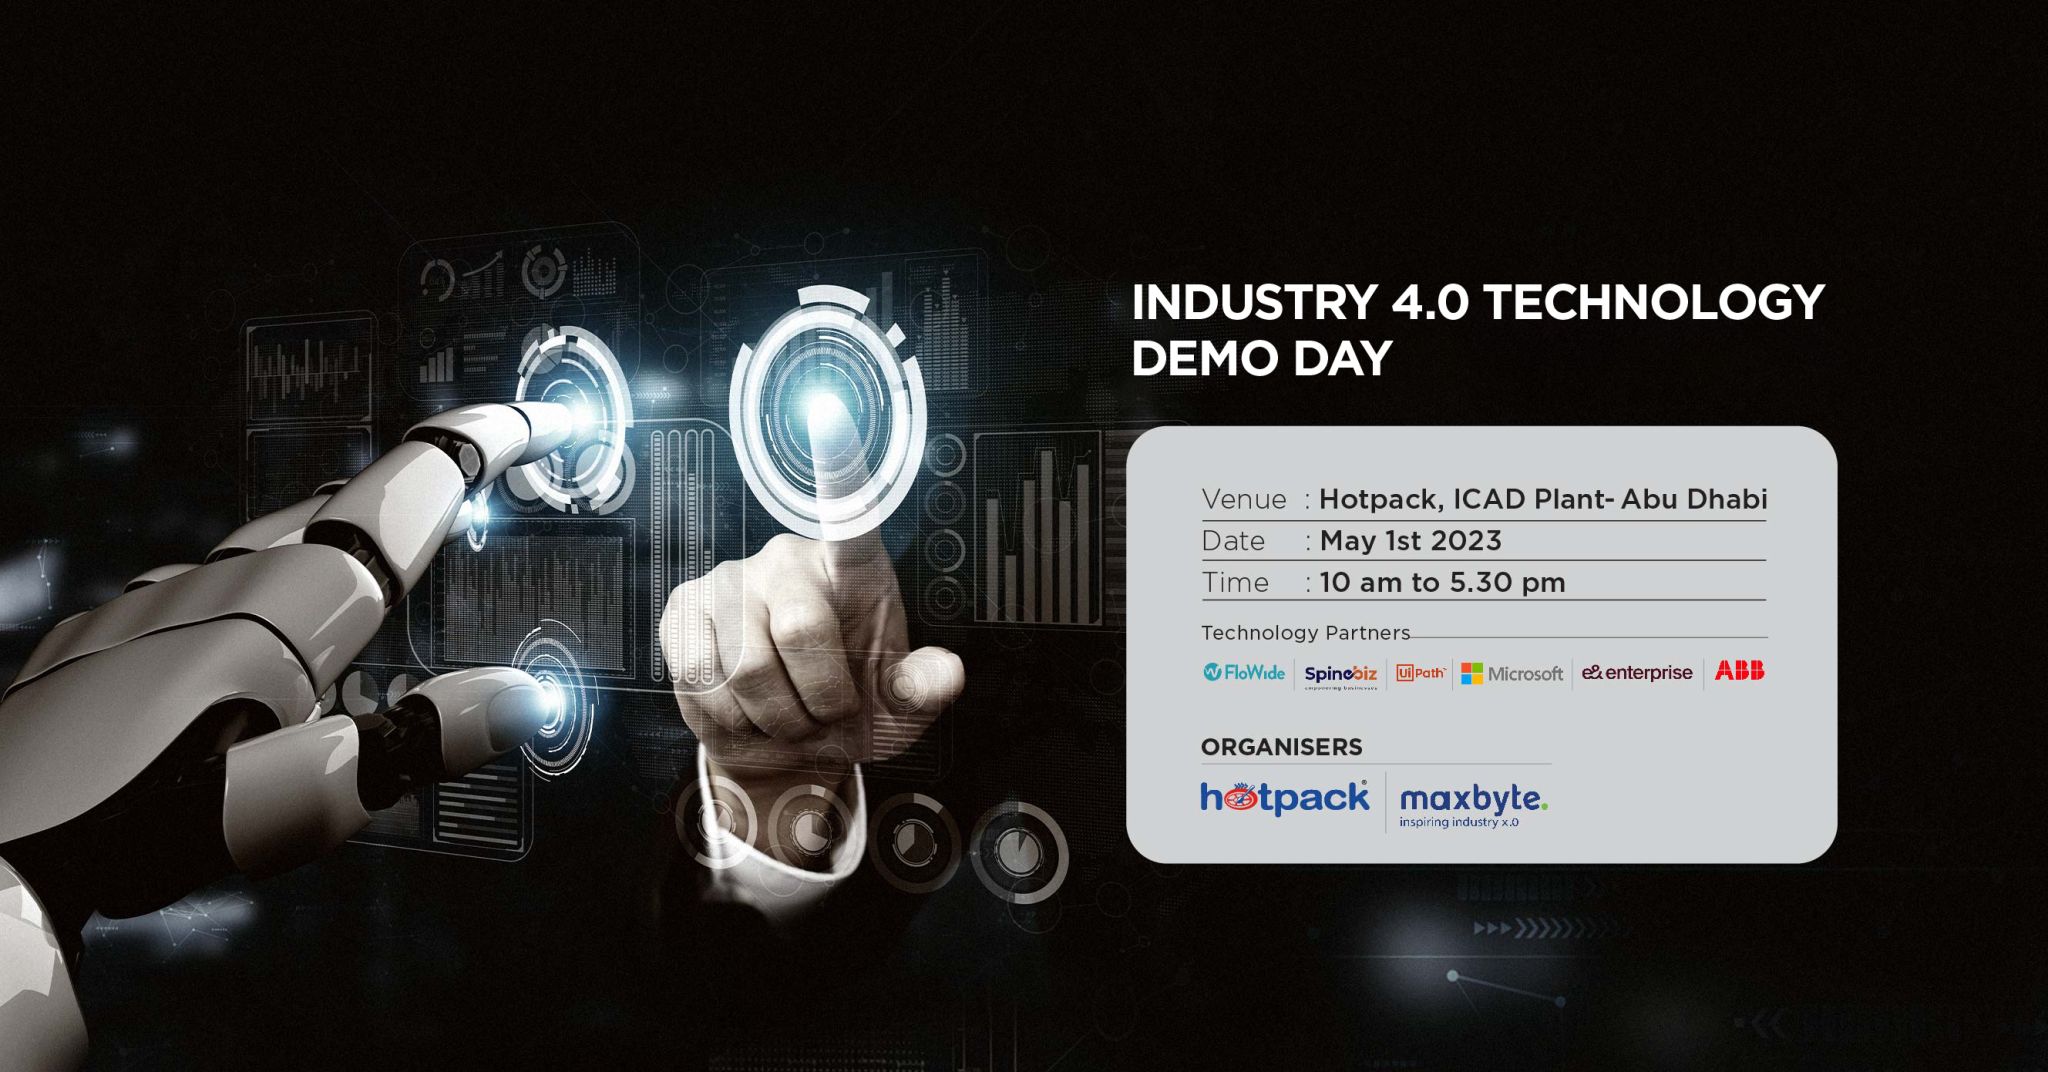 Industry 4.0 Technology Demo Day - Maxbyte